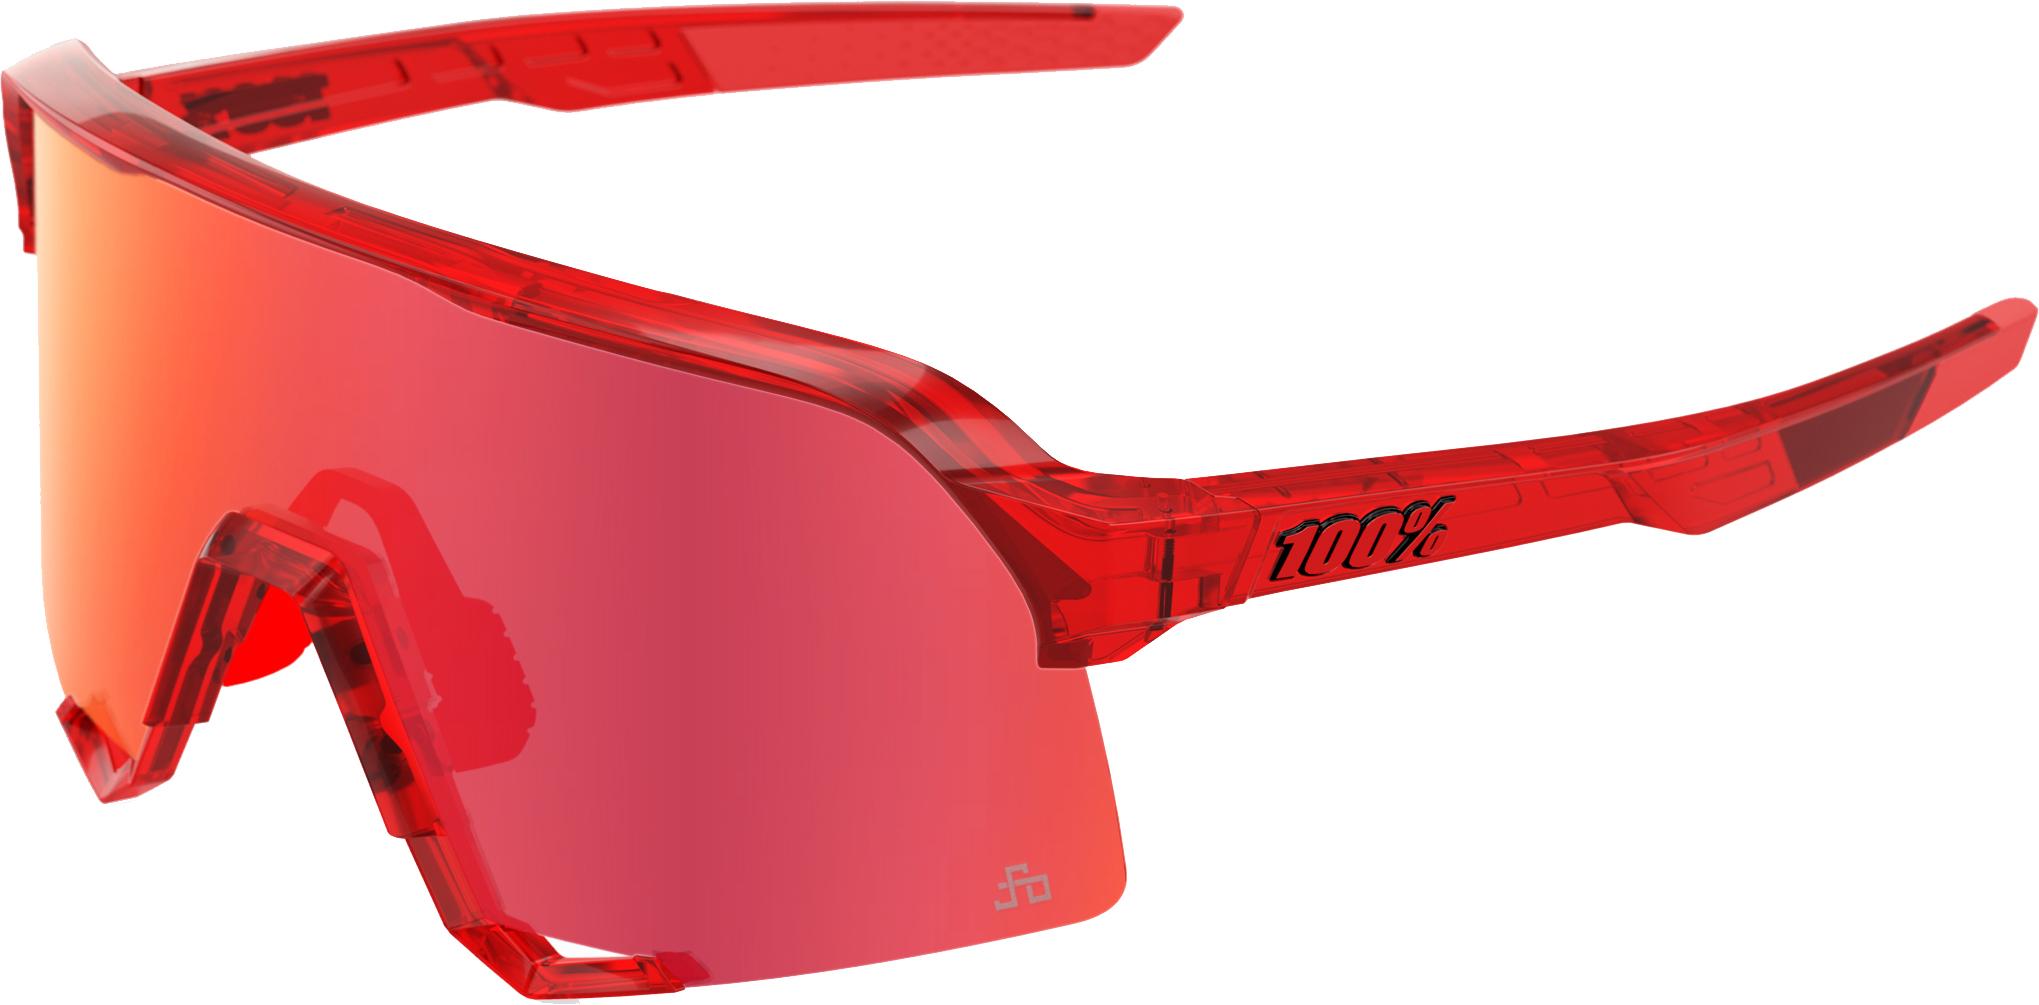 100% S3 Peter Sagan Le Gloss Translucent Red Sunglasses (hiper Red Mirror Lens)  Hiper Red Mirror